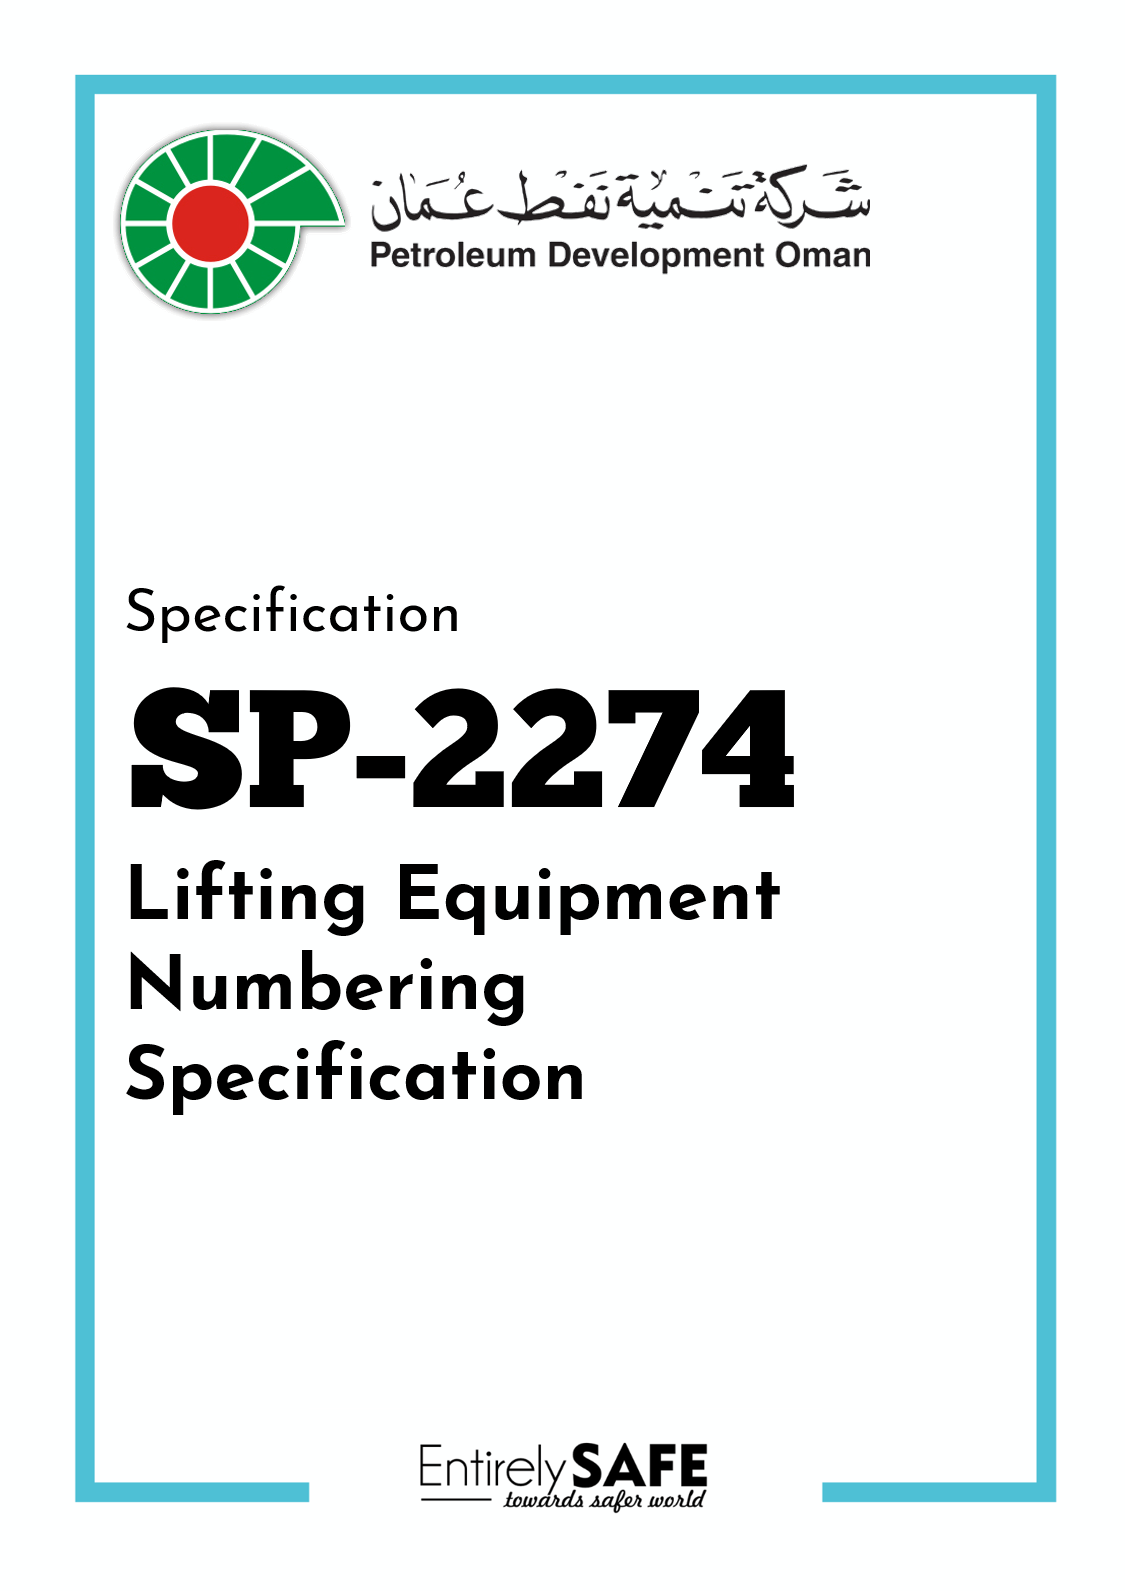 SP-2274-Lifting-Equipment-Numbering-Specification-PDO-download